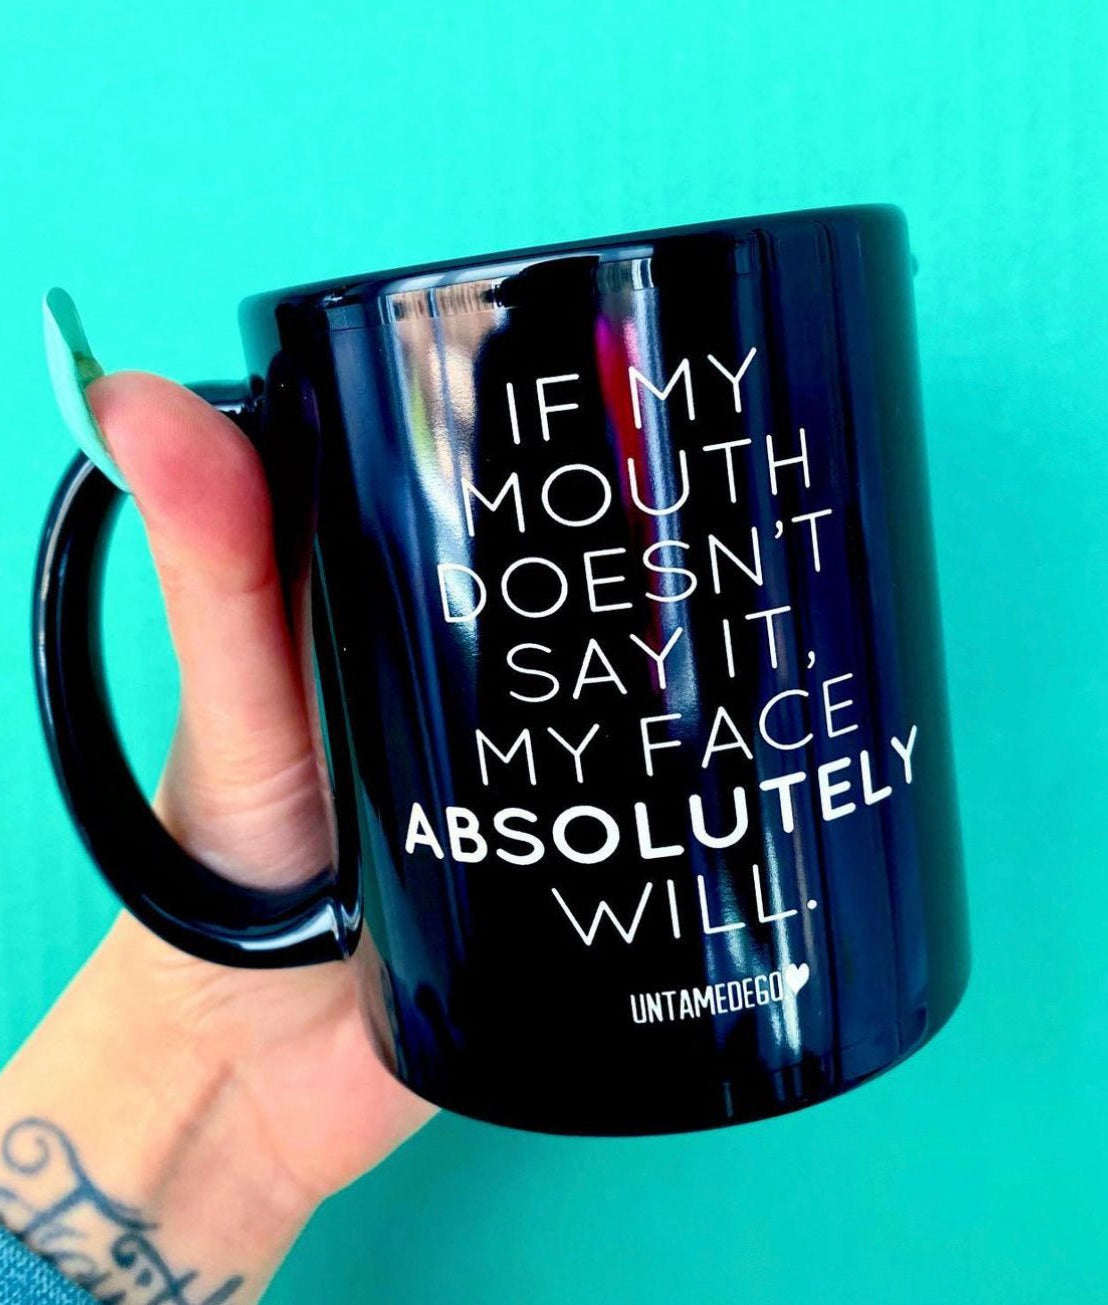 If My Mouth Doesn't Say It My Face Absolutely Will 11oz Mug - UntamedEgo LLC.